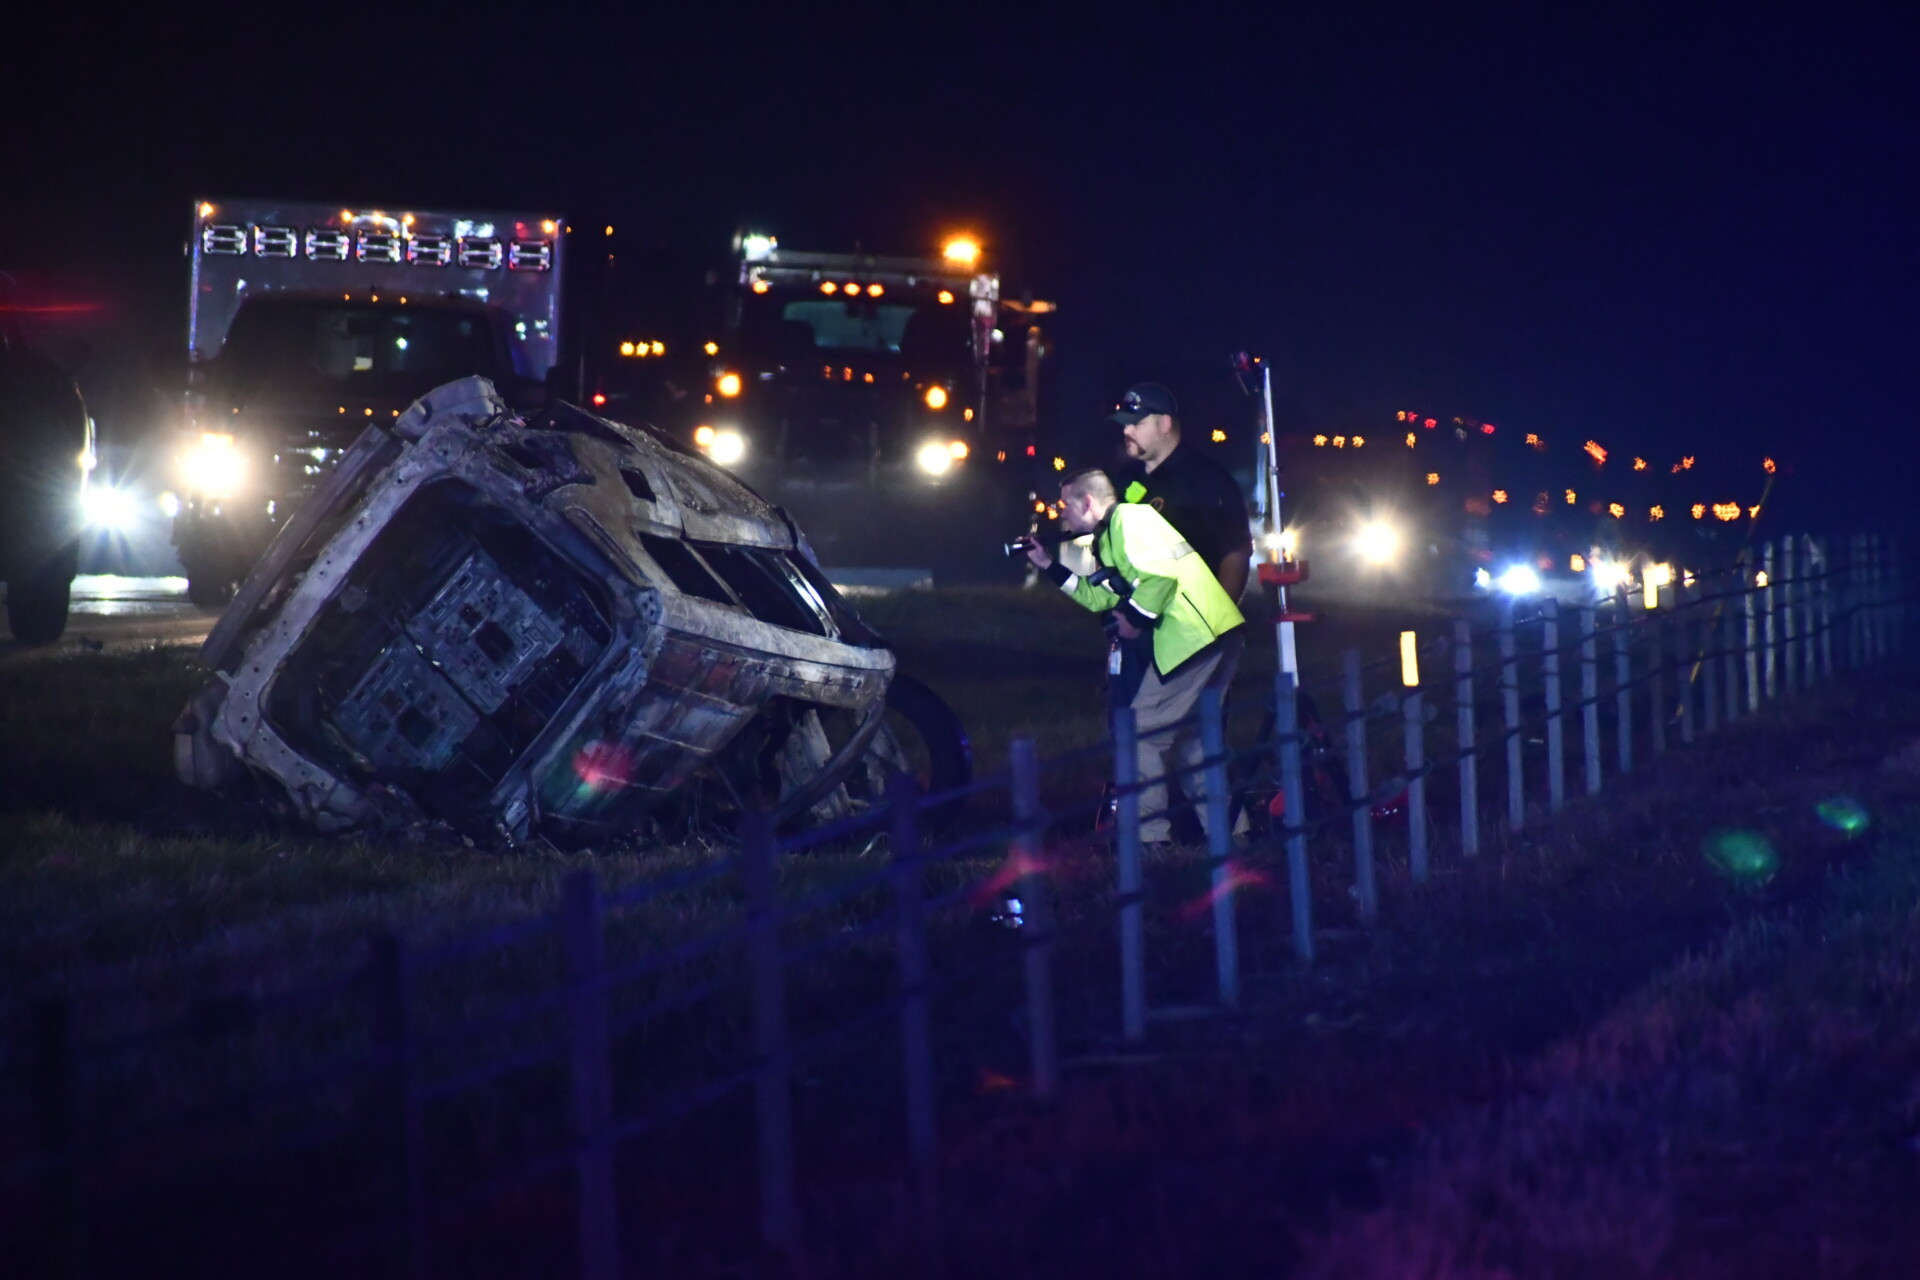 I71 South Fatality Accident Wrong way driver